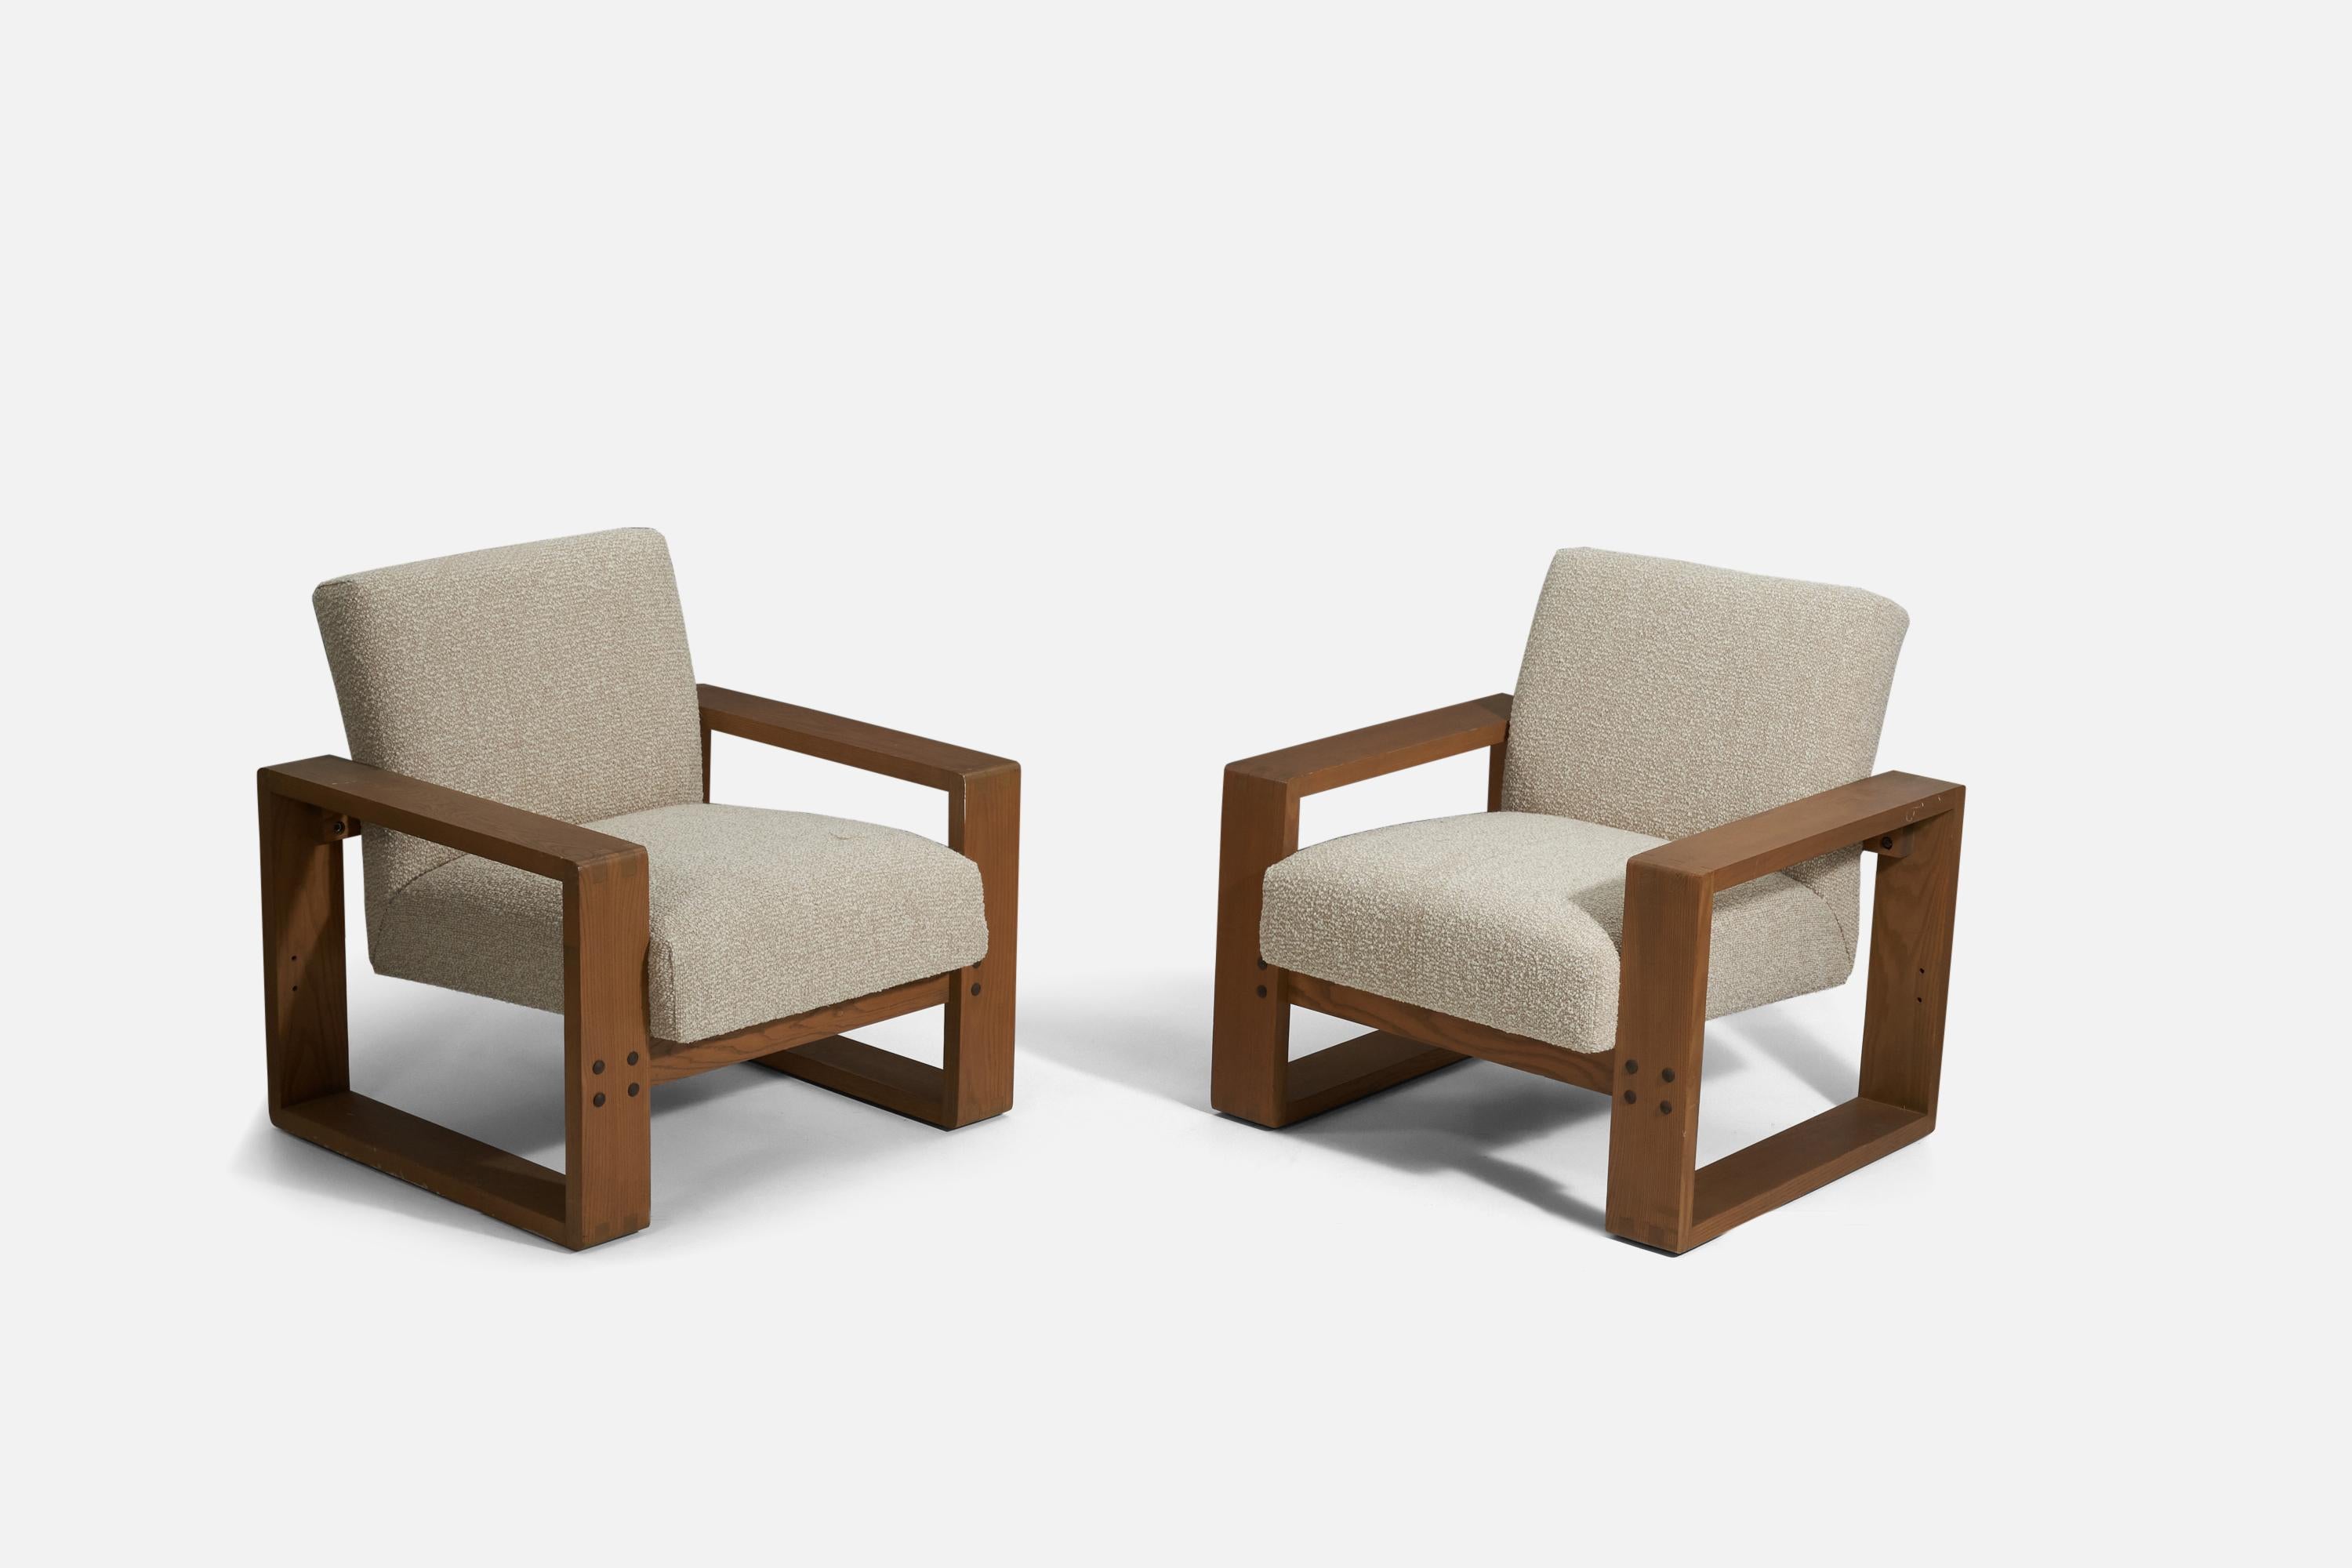 A pair of oak and fabric lounge chairs, produced by Hans Krieks, Boston, Massachusetts, c. 1975.